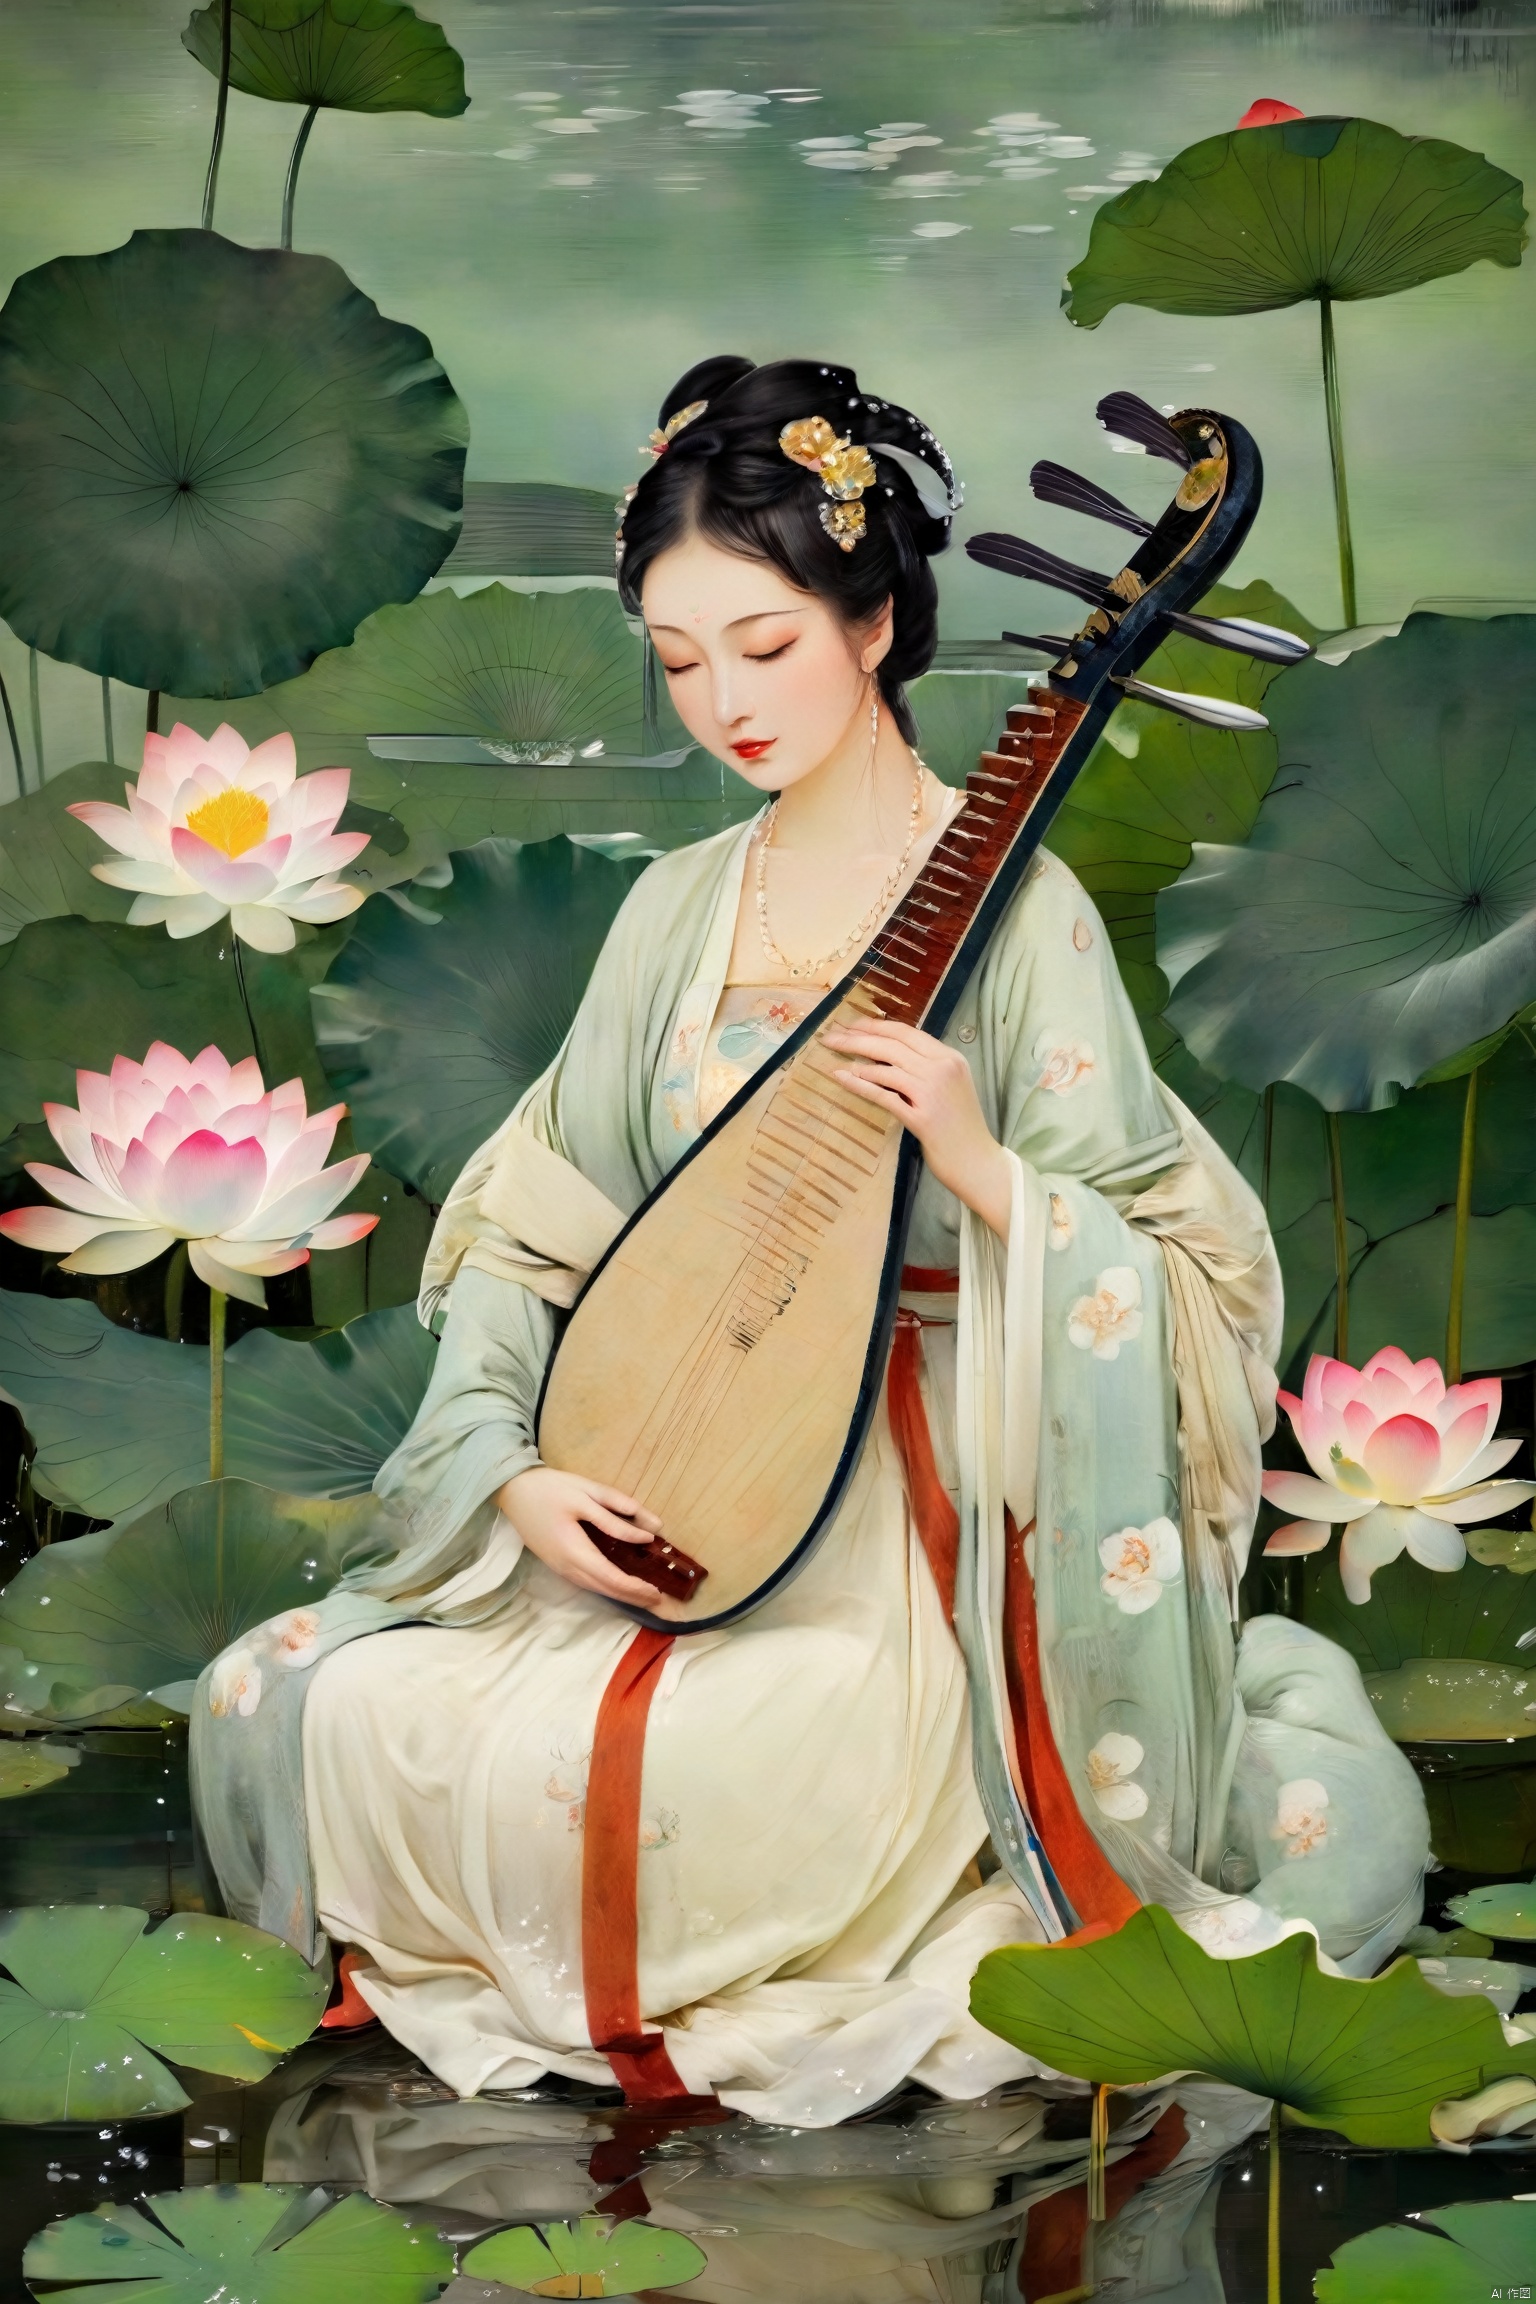 The woman, dressed in traditional Hanfu, sits on a green stone by the pond, gently strumming her biwa lute. The blooming lotus flowers and darting dragonflies complement the melodious notes of the pipa, creating a harmonious scene of movement and stillness.